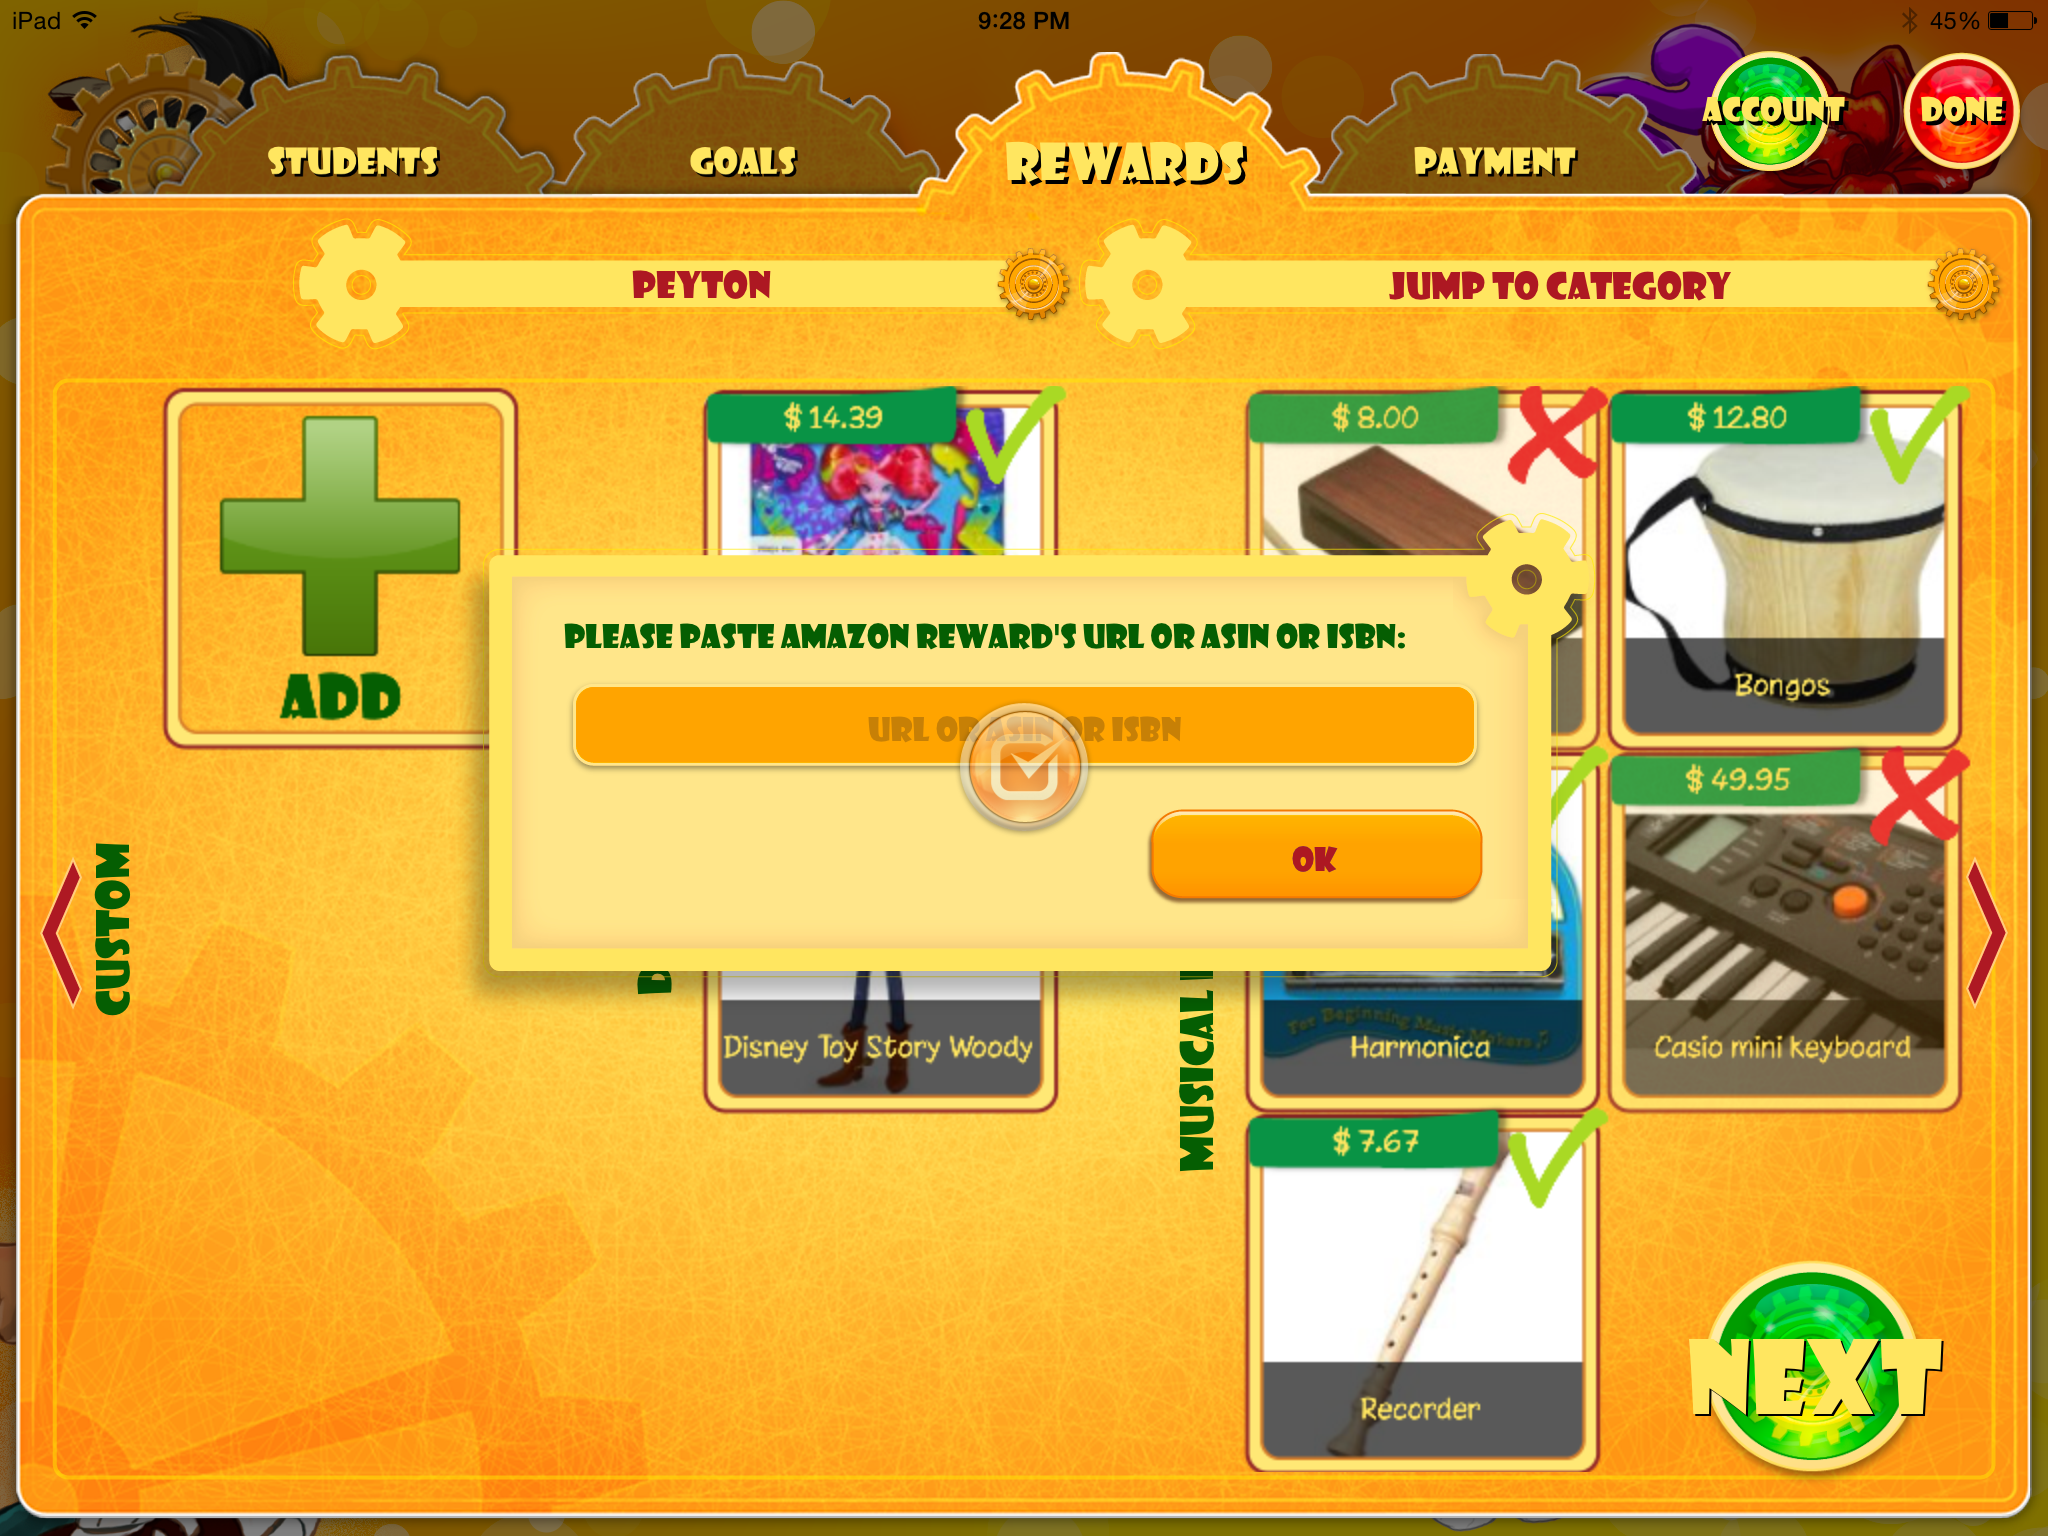 Reward learning with the Learn & Earn app! Fun learning for elementary-aged children.